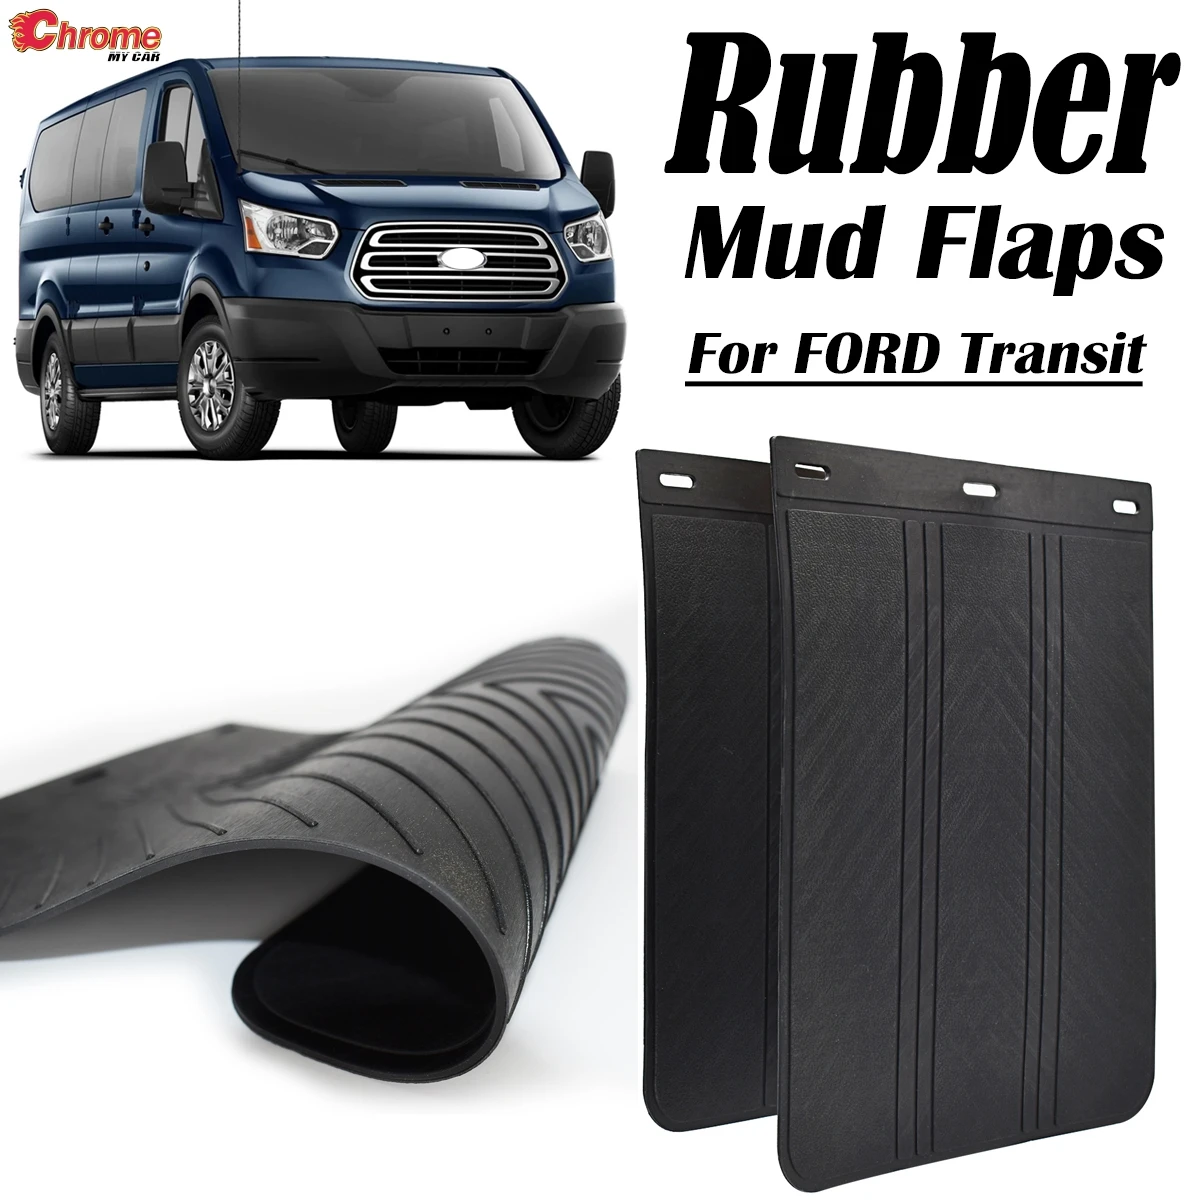 

2PC Mud Flaps For Ford Ford Transit Connect Courier Custom Mk6 Mk7 Mk8 Camper Van Mudflaps Splash Guards Mudguards Accessories